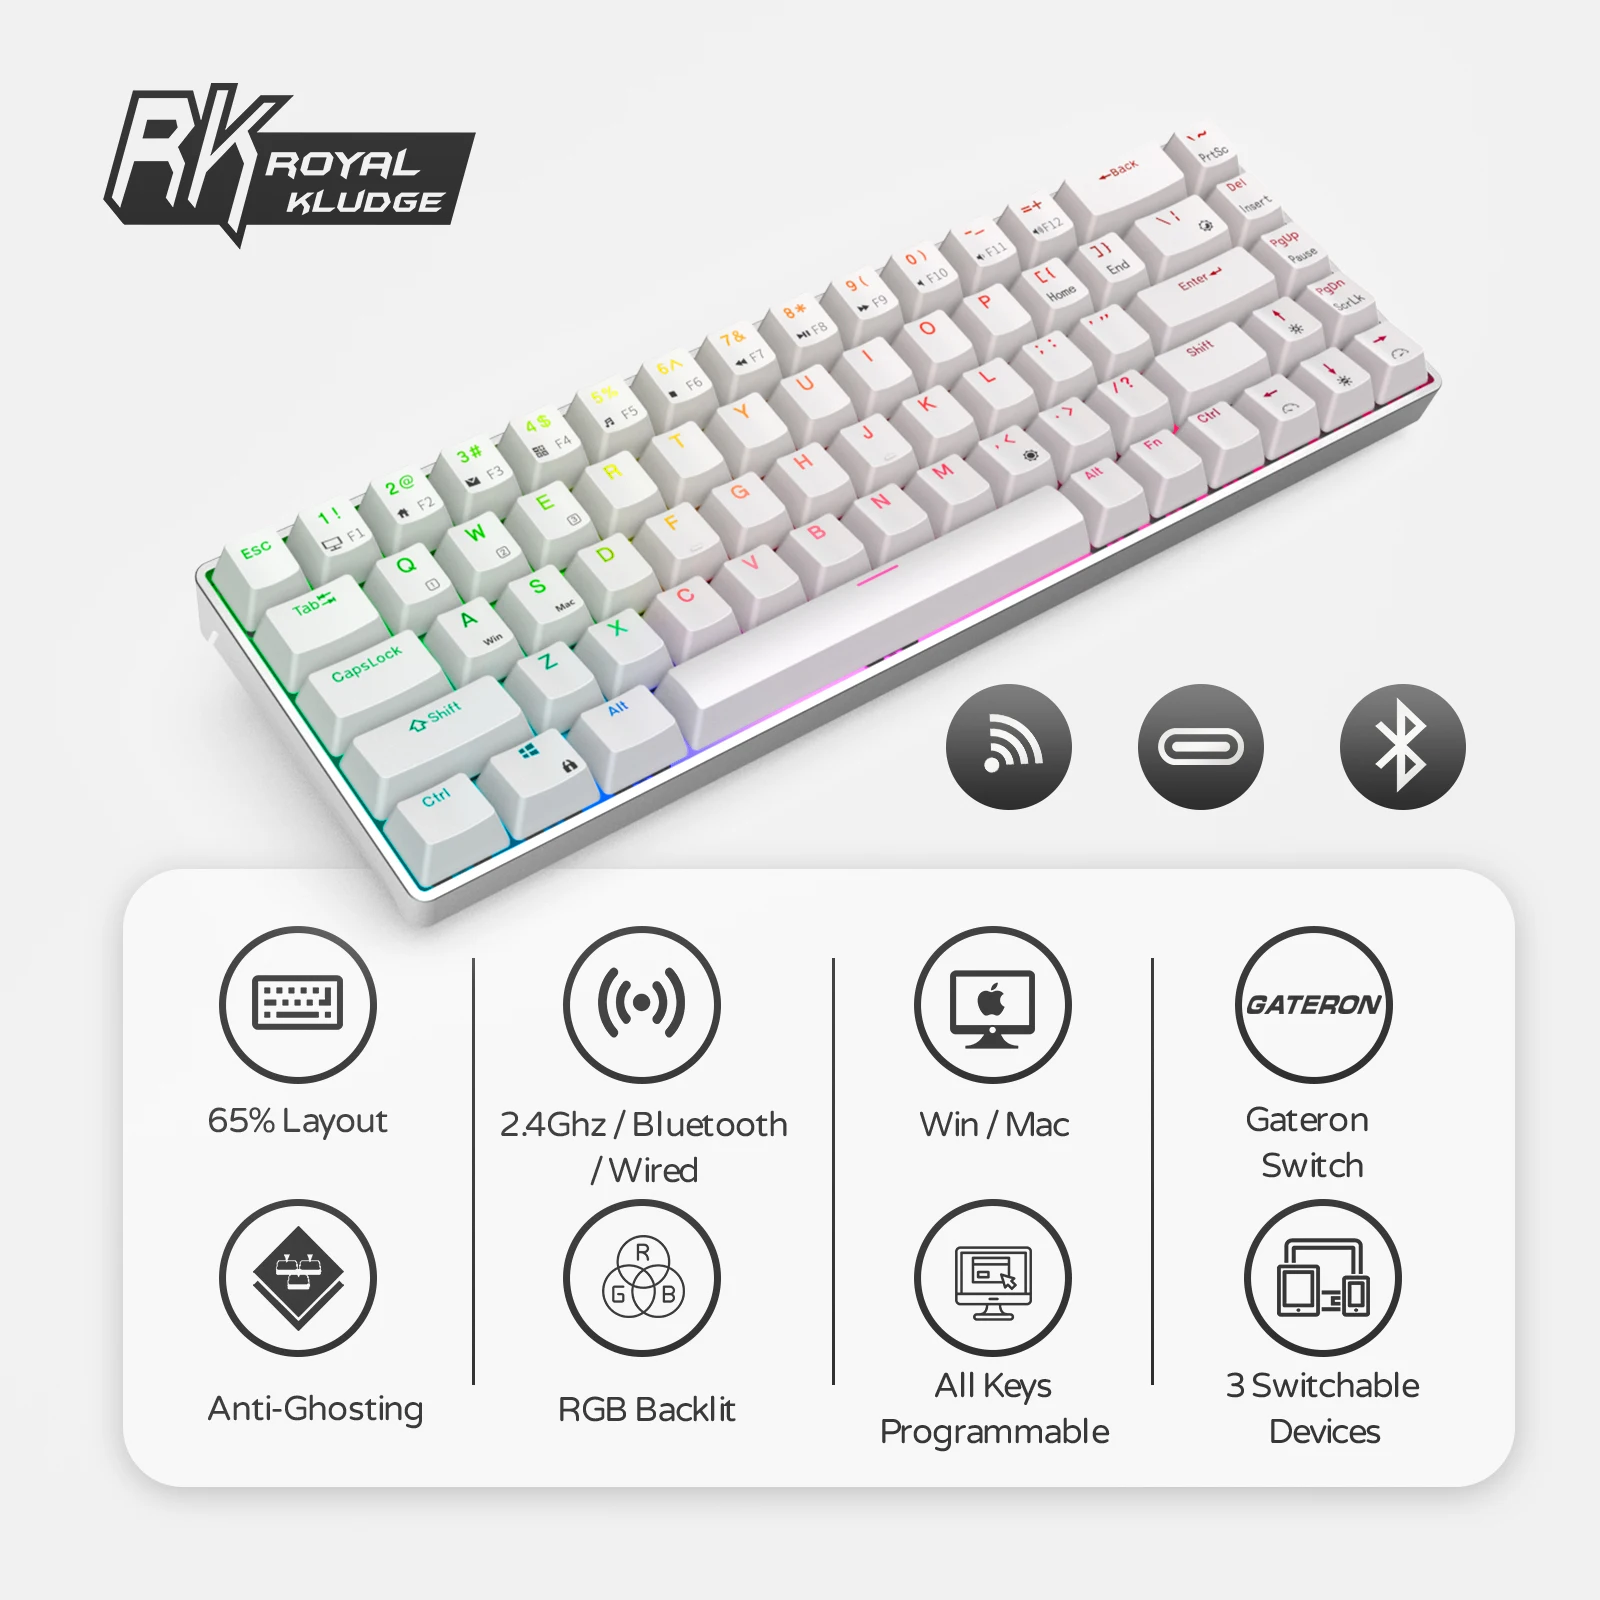 RK68 Pro RGB Backlit Hot-swap Mechanical Keyboard, 2.4Ghz Wireless/Bluetooth/Wired Gateron Switch Gaming Keyboard with CNC Case enlarge